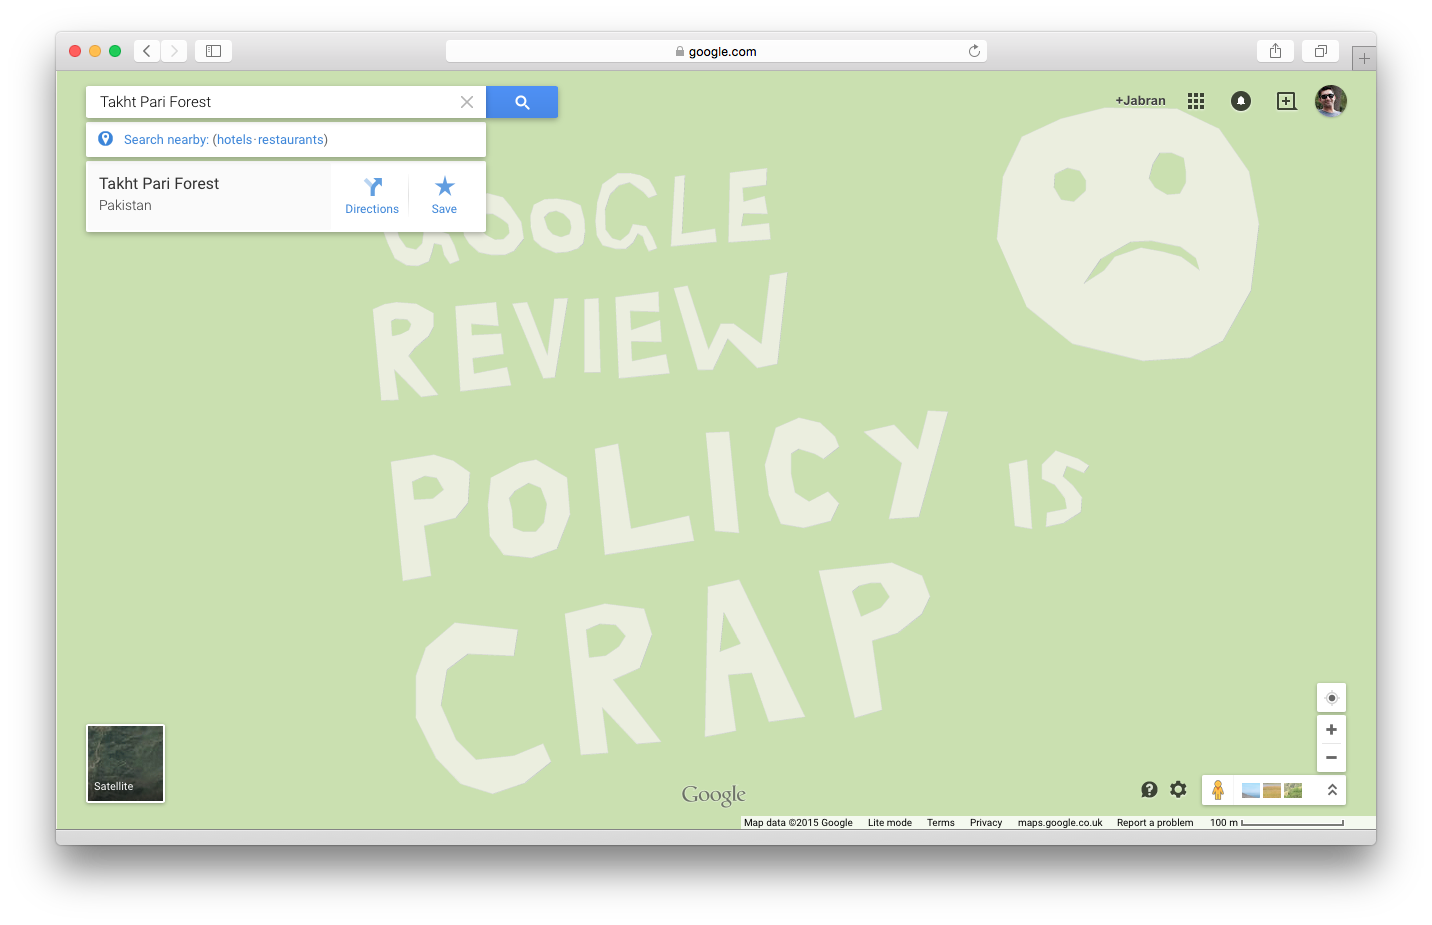 Google review policy is crap